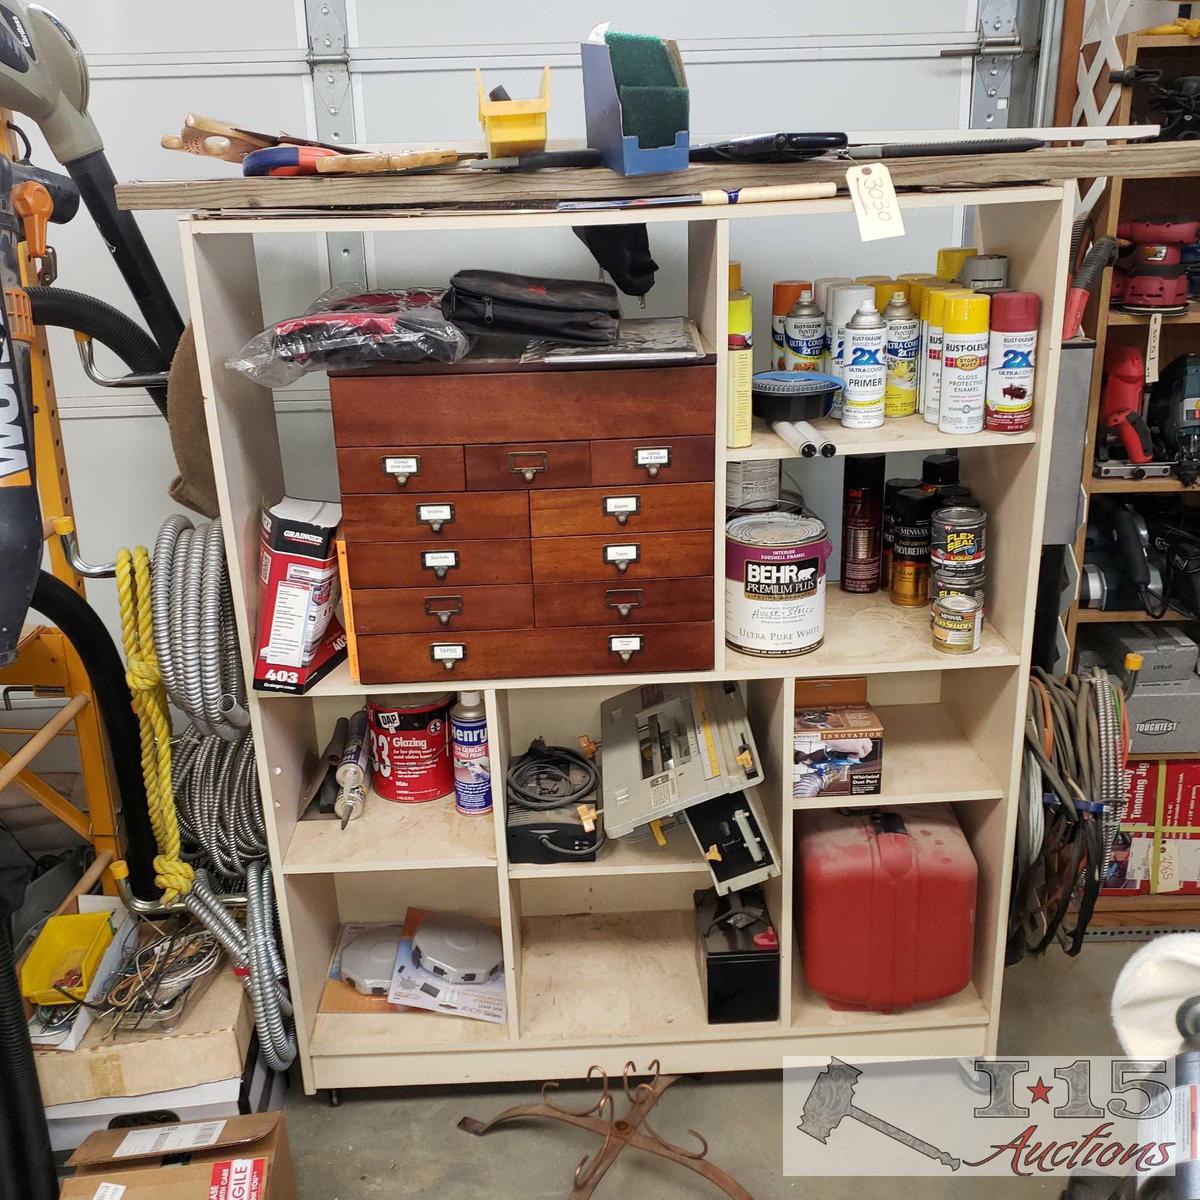 Wooden Shelving Unit, Router, Hand Saw, Rust oleum Paint, And More